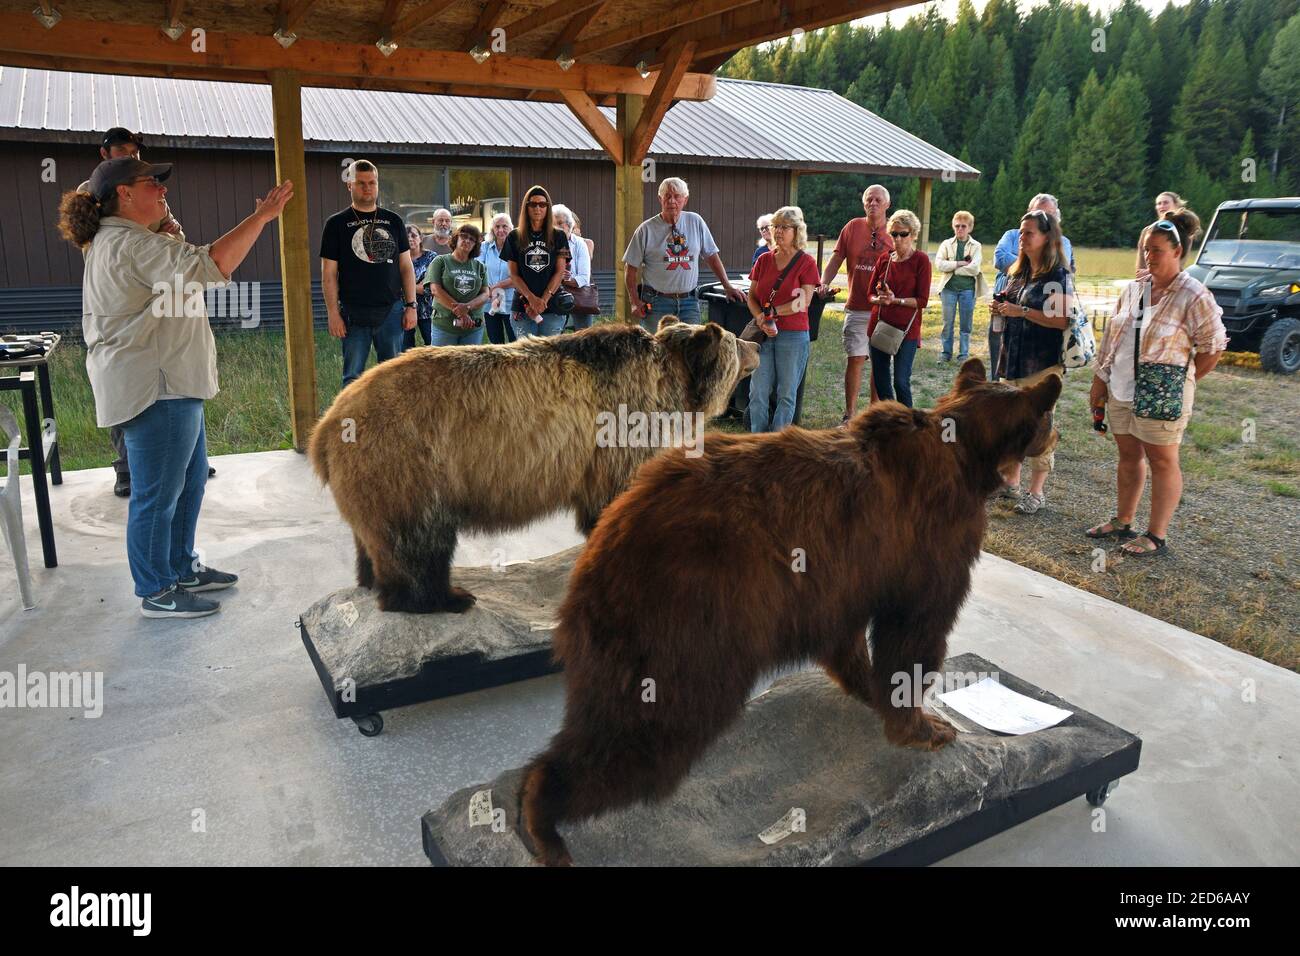 Kim Annis of the Montana Department of Fish, Wildlife and Parks, speaks to Yaak community during bear aware presentation. (Photo by Randy Beacham) Stock Photo